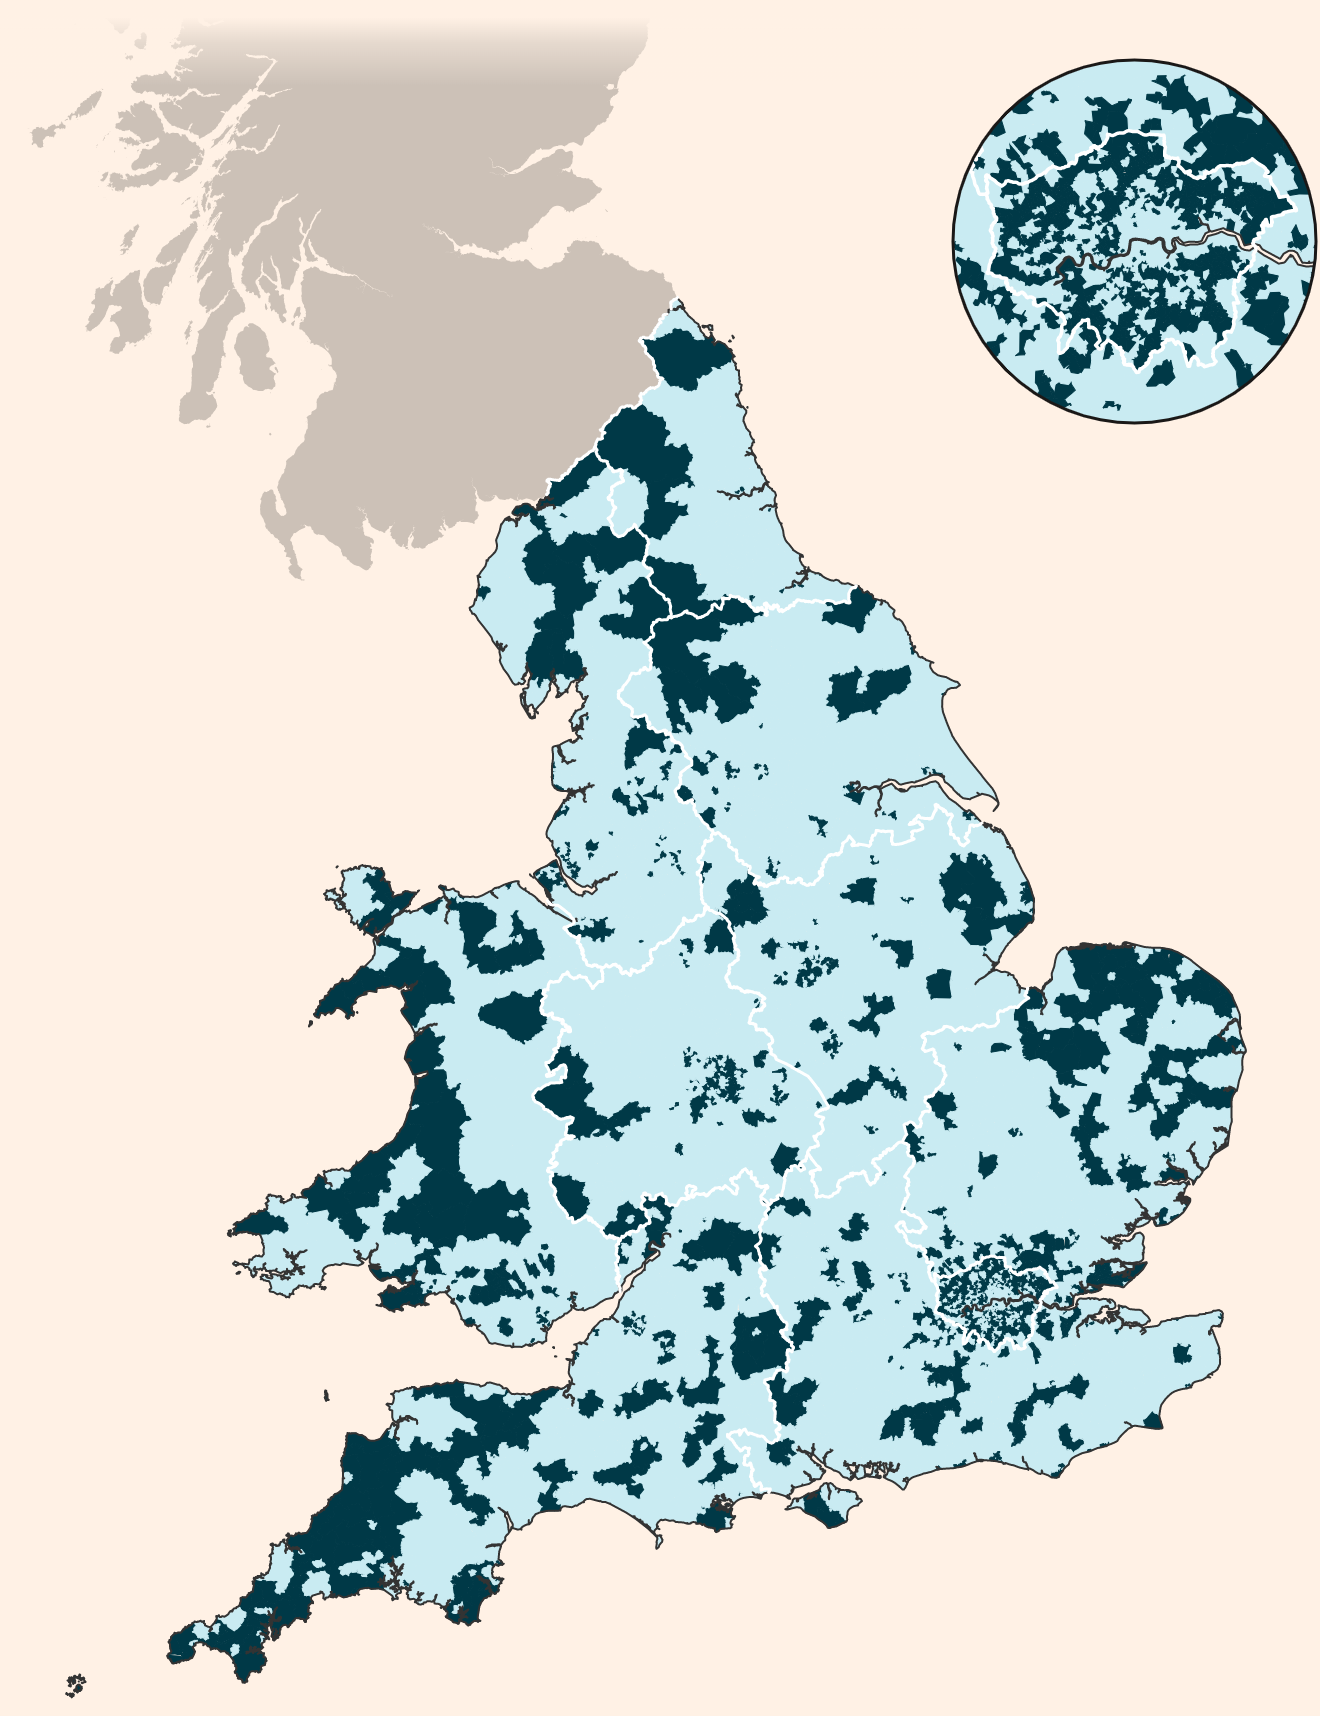 Map of England and Wales highlighting those areas with the highest energy saving potential